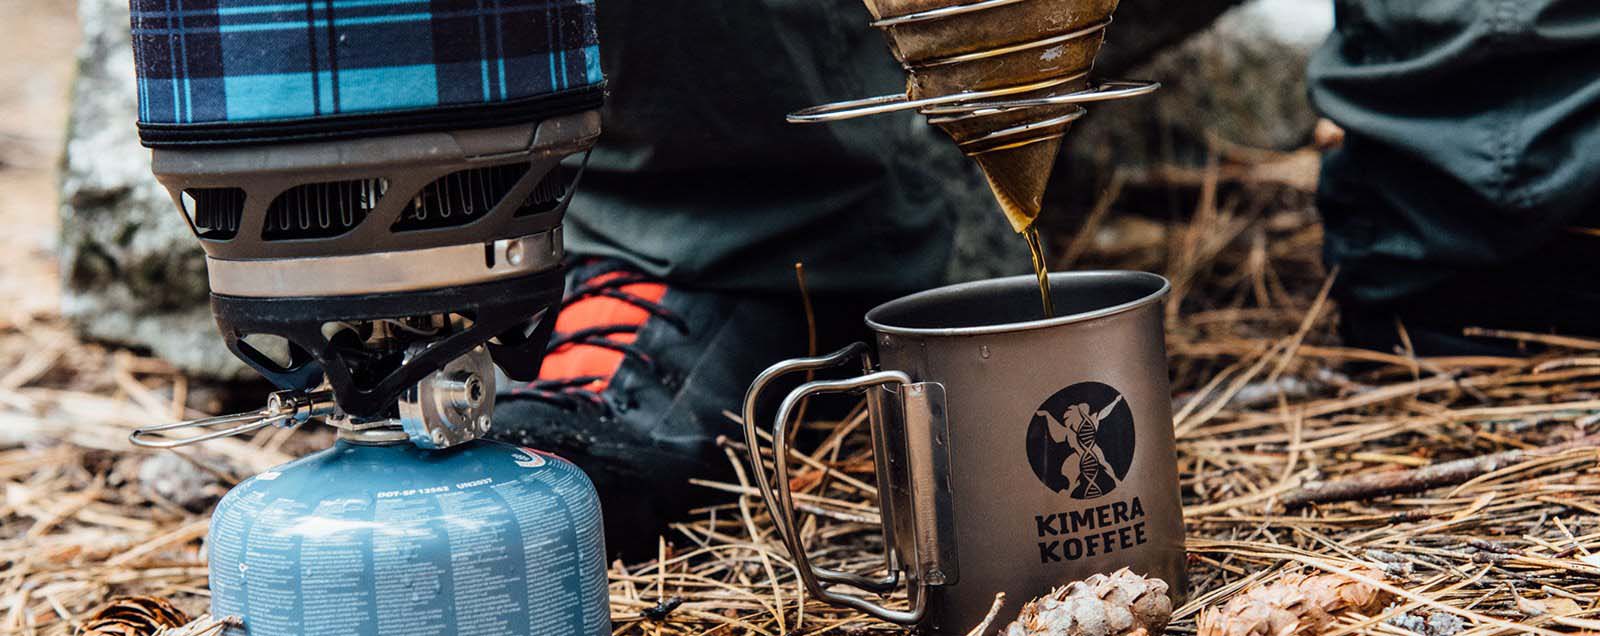 coffee being dripped into a stainless steel Kimera Koffee mug set on pine needles next to a propane camp lantern